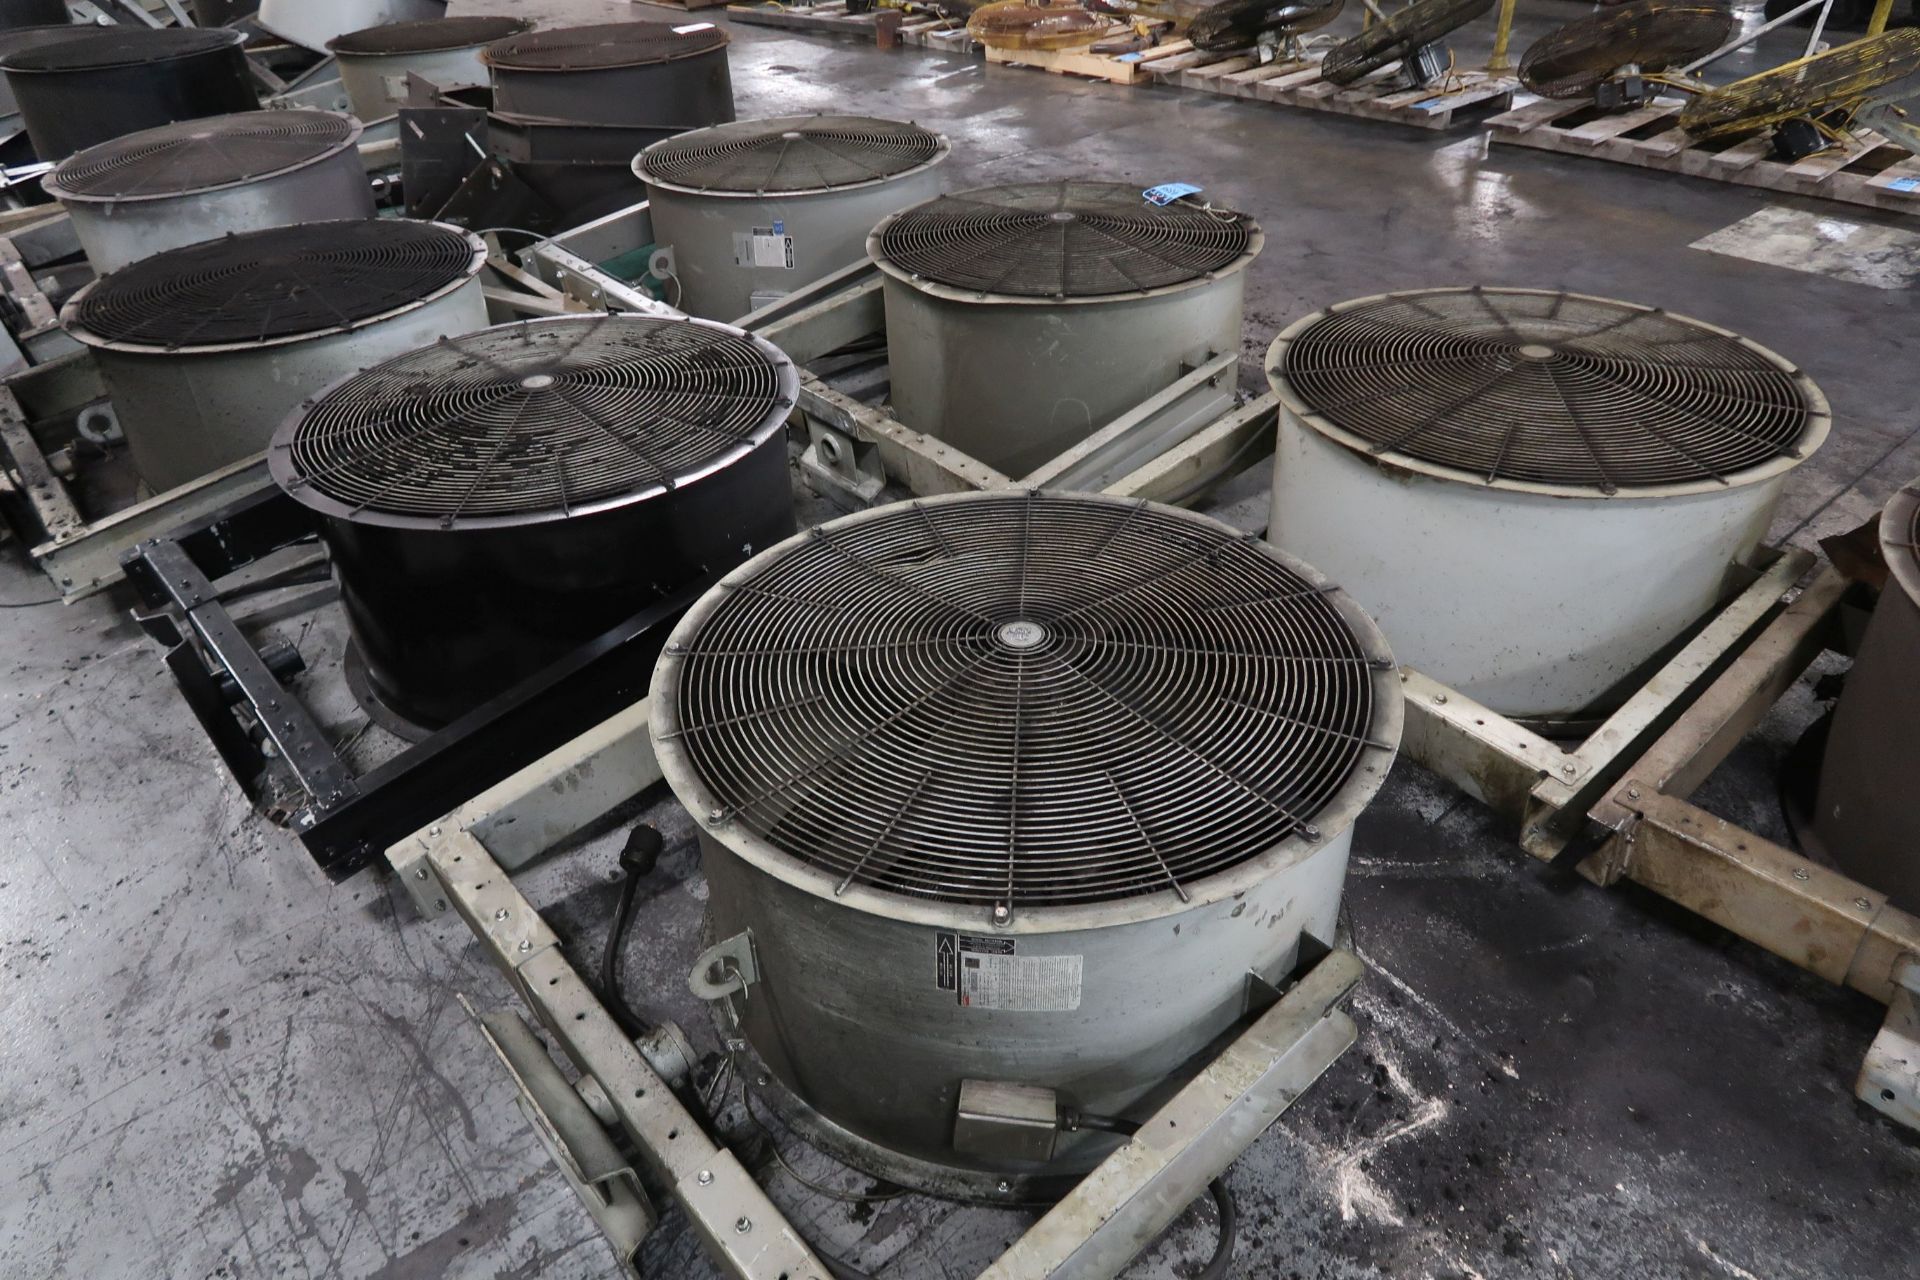 36" CIRCULAR FANS WITH MOUNTING HARDWARE **LOADING PRICE DUE TO ERRA - $50.00** - Image 2 of 2